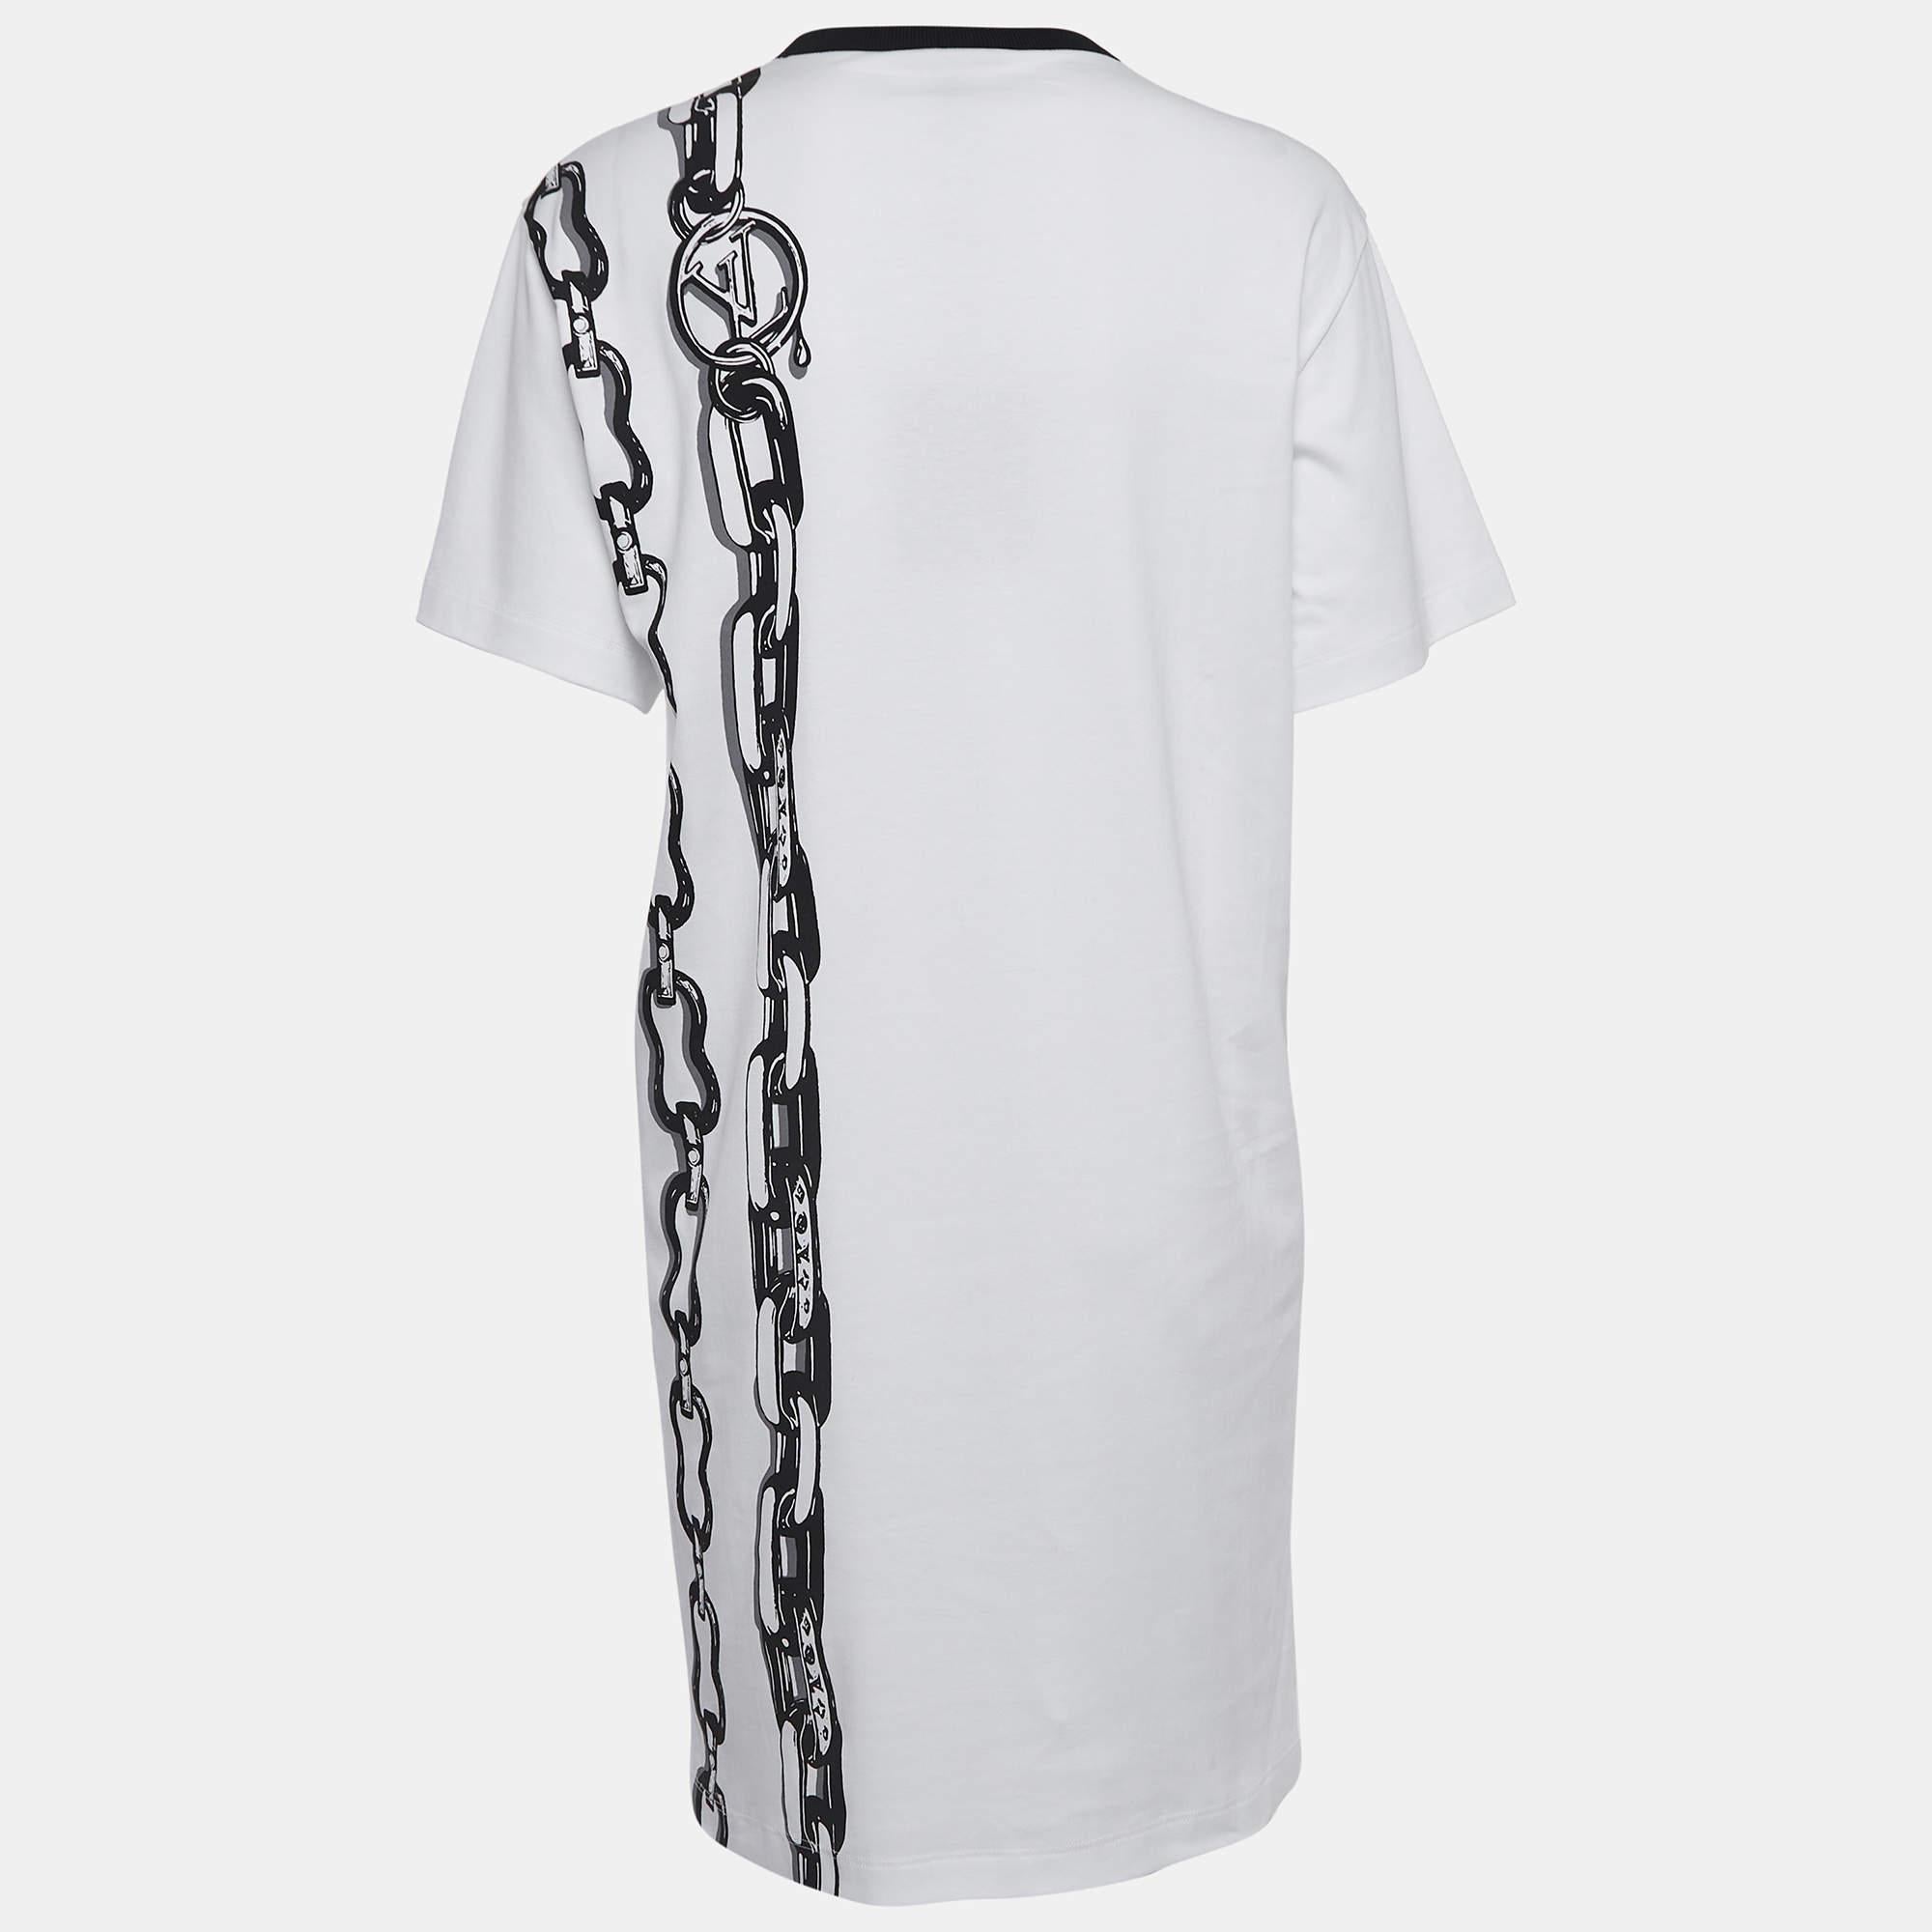 The Louis Vuitton t-shirt dress exudes casual luxury with its iconic monogram chain pattern. Crafted from premium cotton, it features a relaxed fit, short sleeves, and a mini length, blending comfort with high-end fashion for a chic and effortless